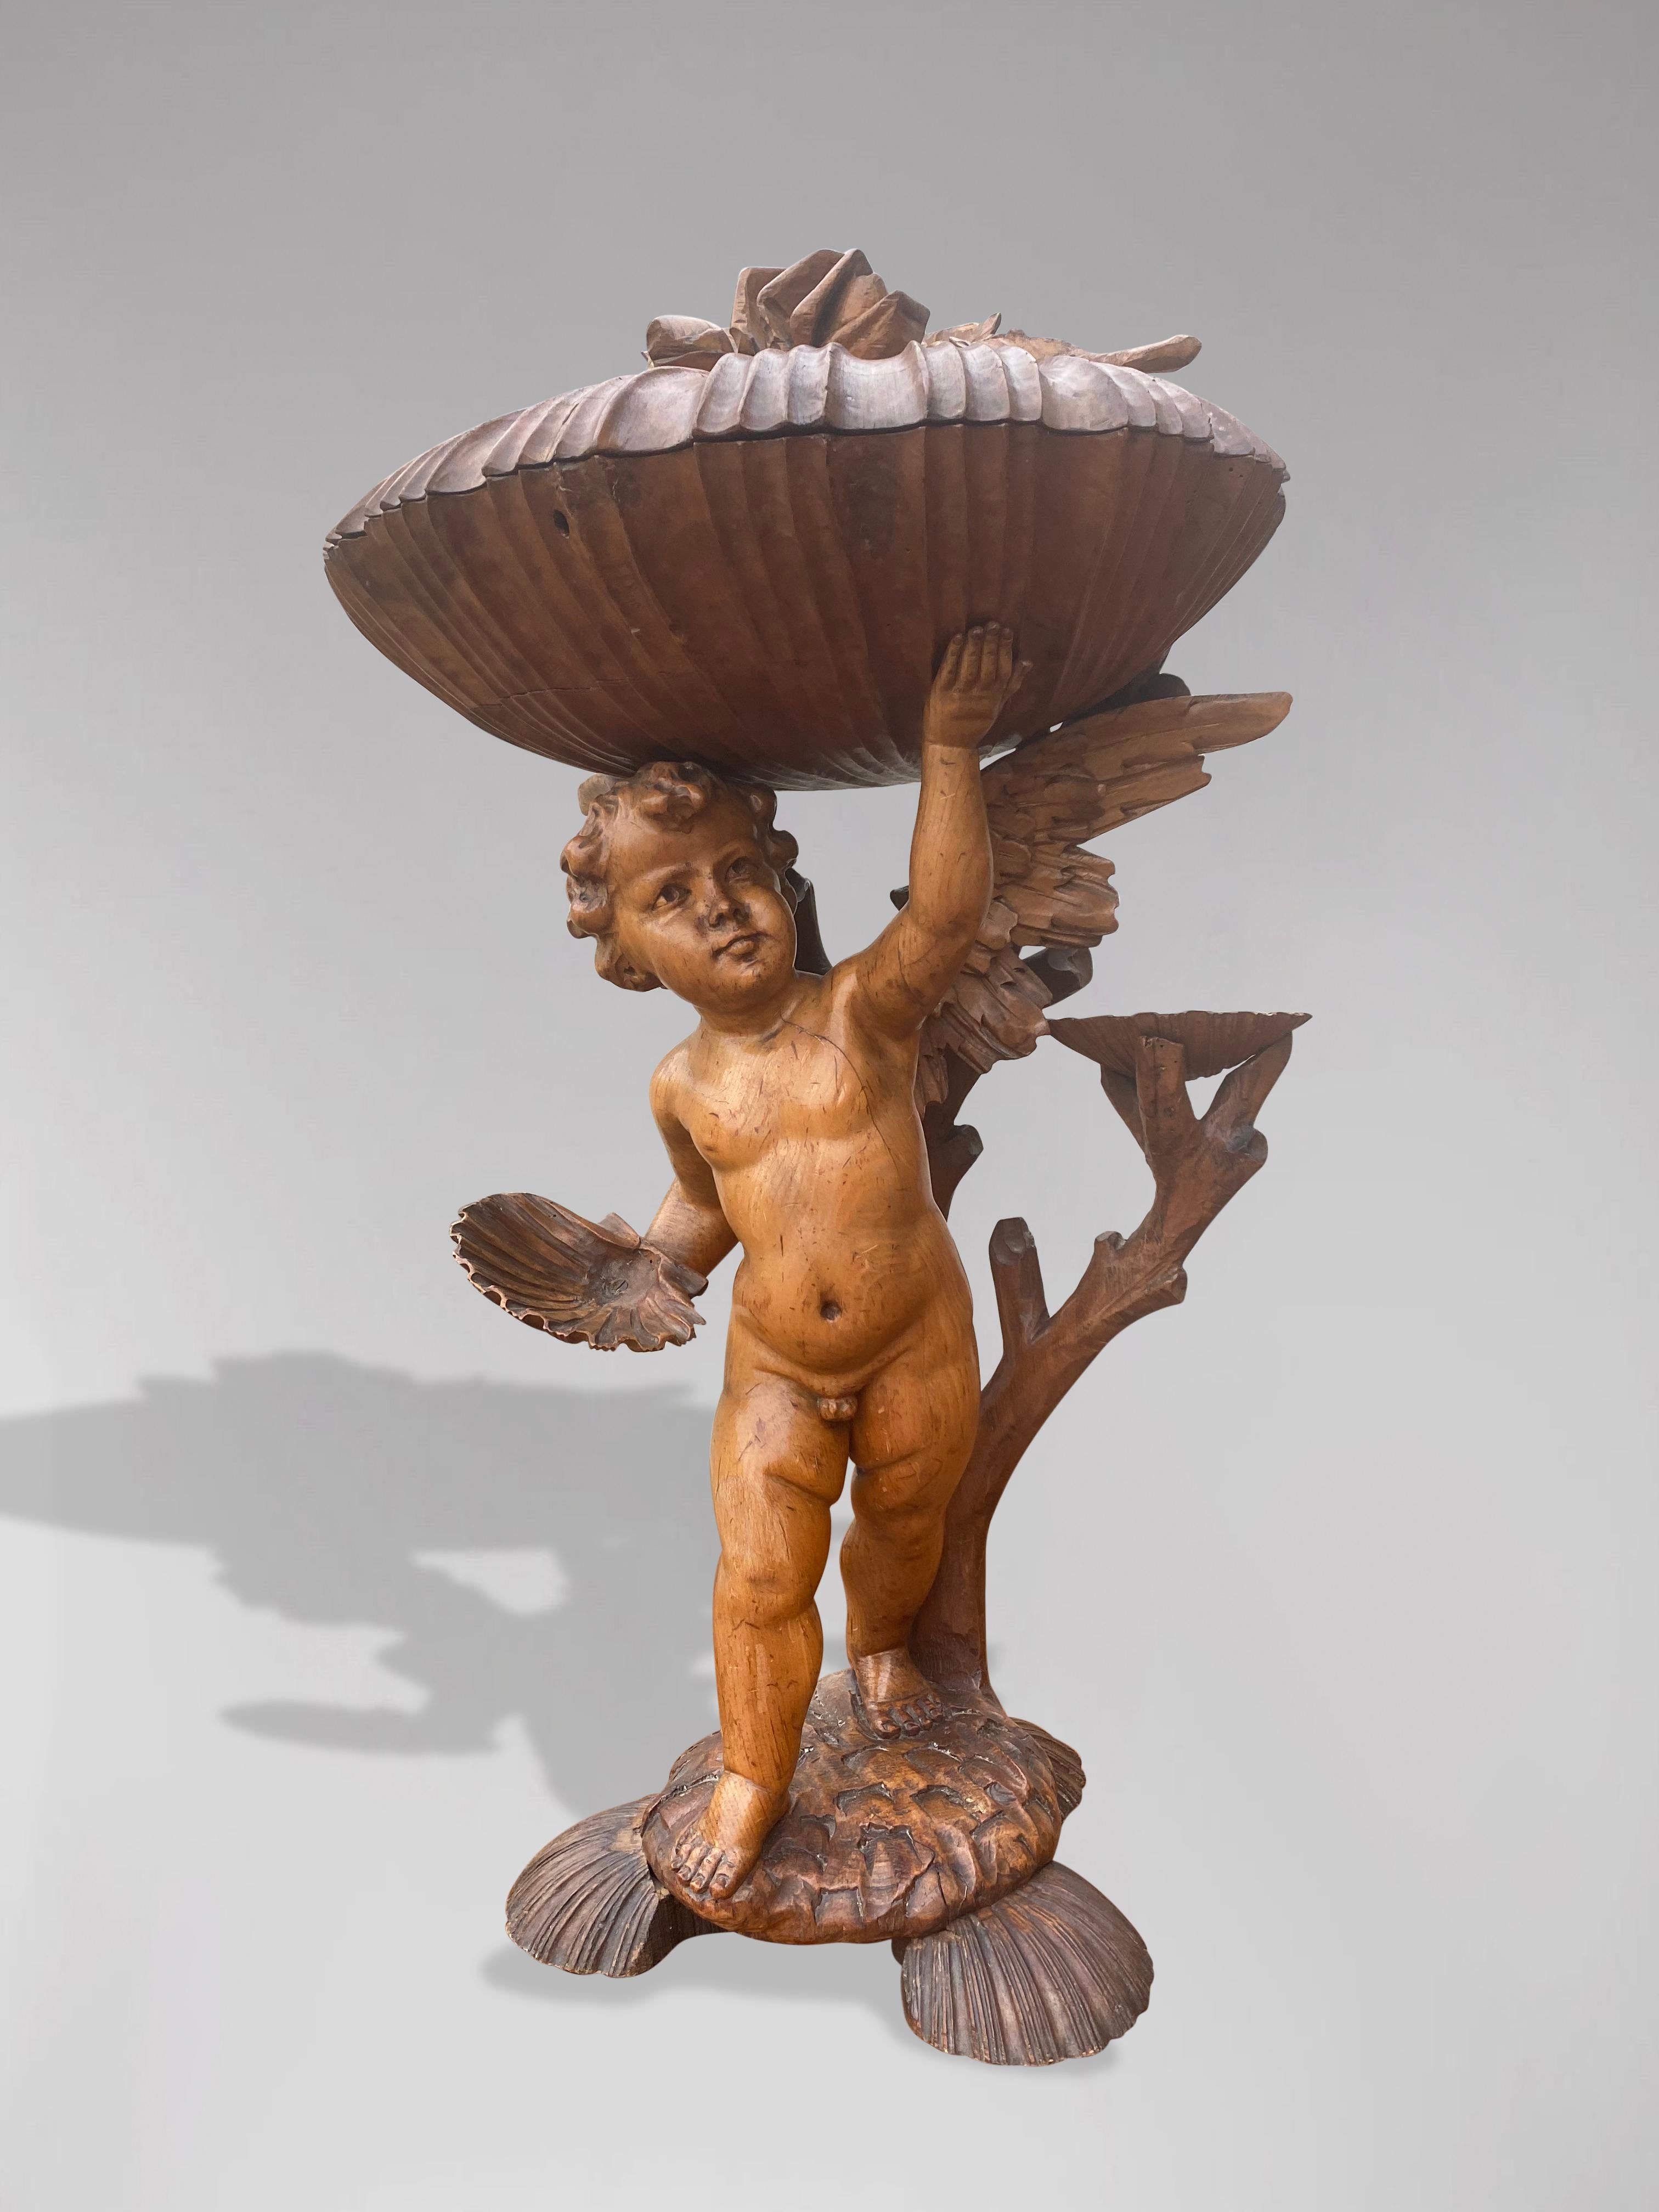 A 19th century impressive large scale Italian Baroque style putti statue, depicts a winged cherub, with branch, different smaller scallop shells and holding one large carved scallop shell in exceptional detail, lovely patina and hand carved into